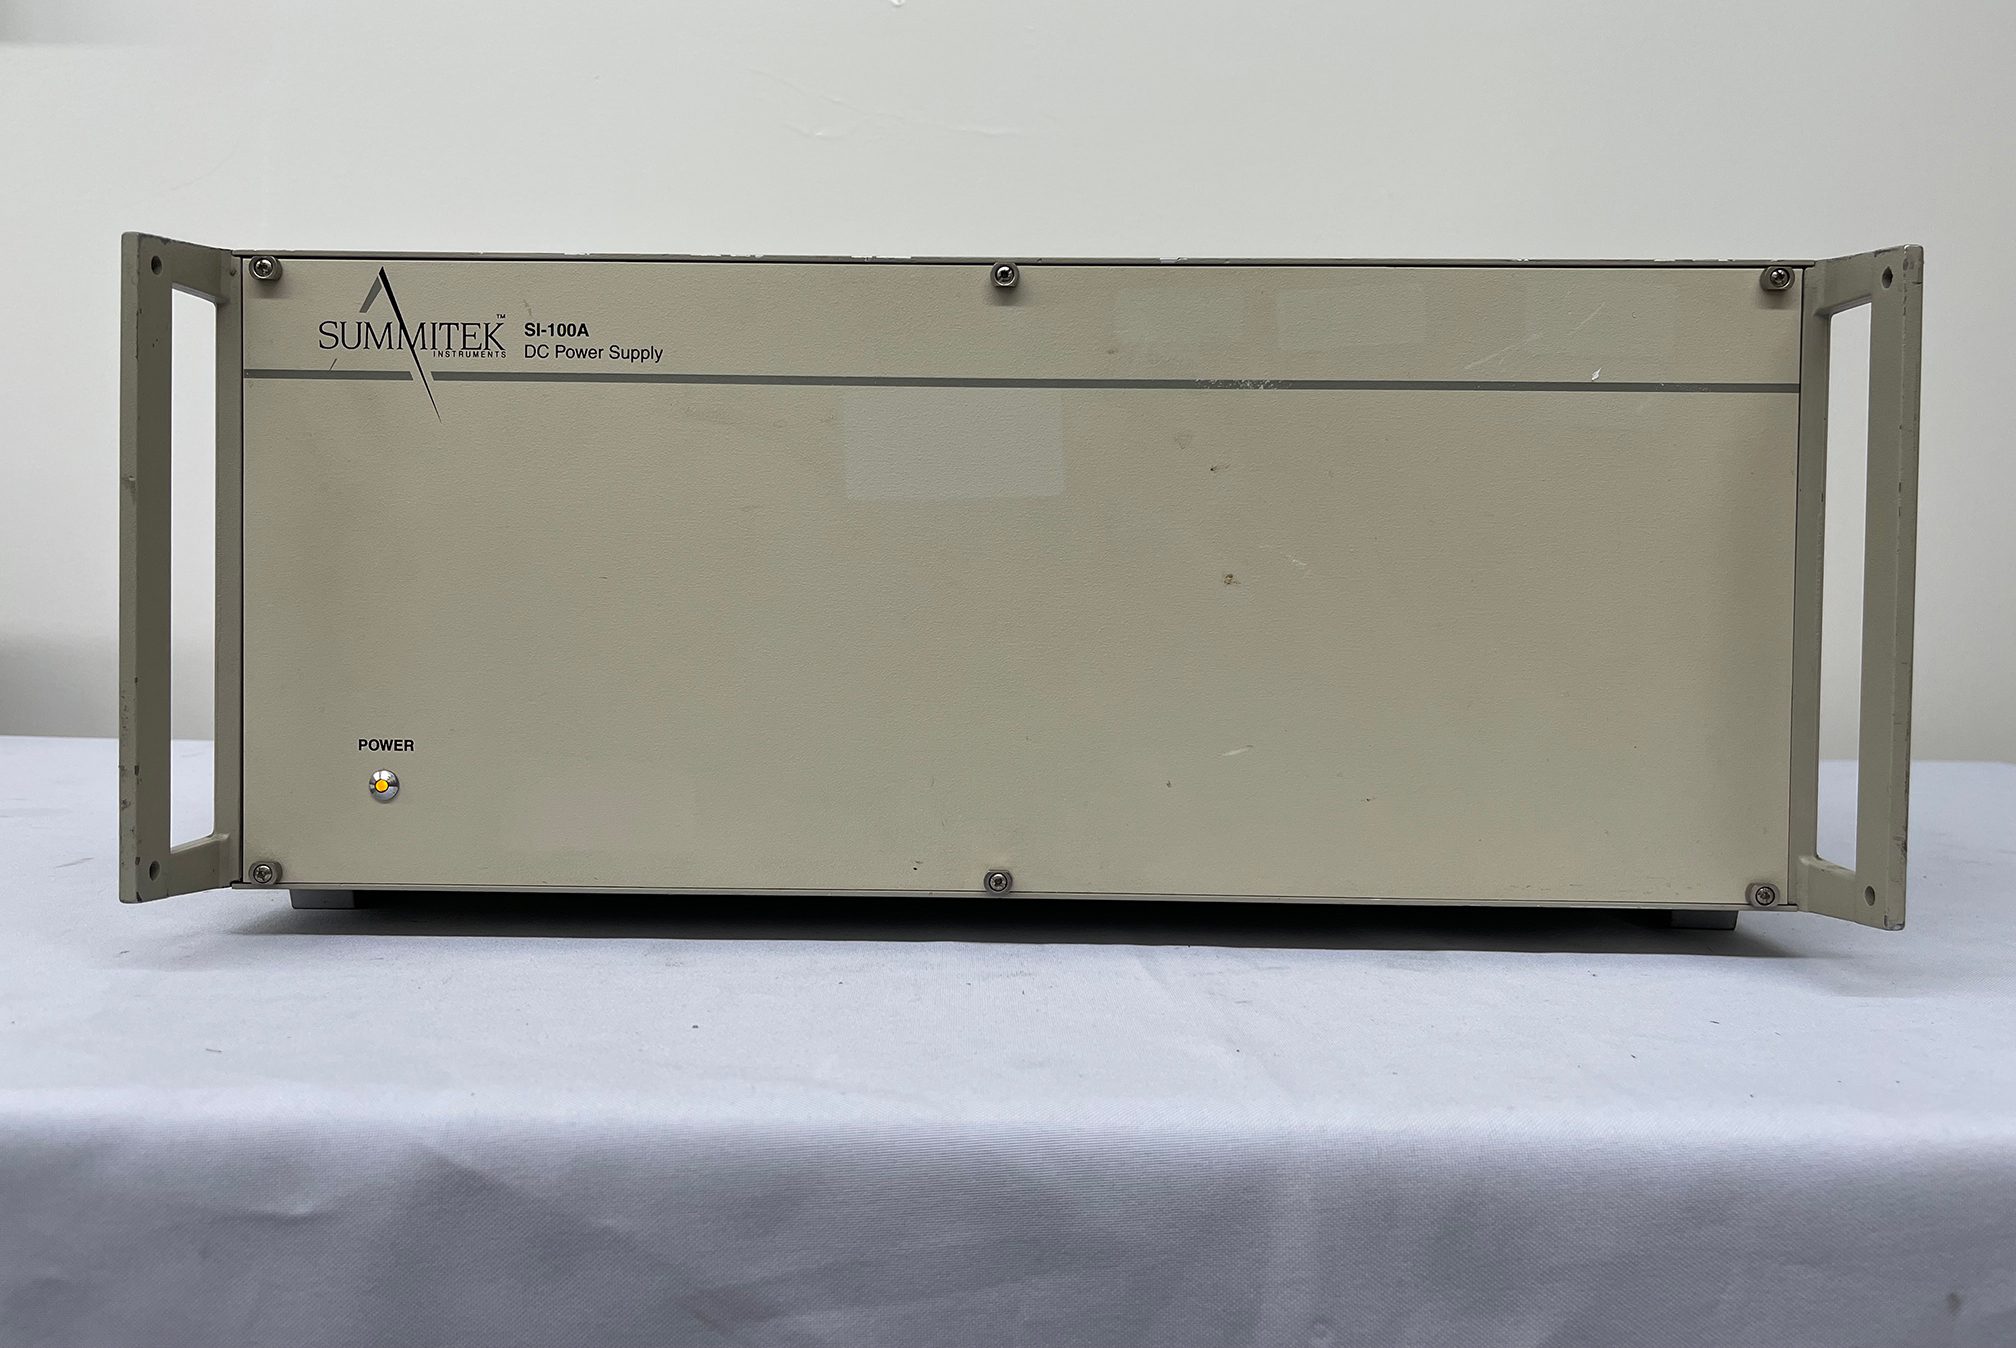 Summitek-SI-100 A-DC Power Supply-58854 For Sale